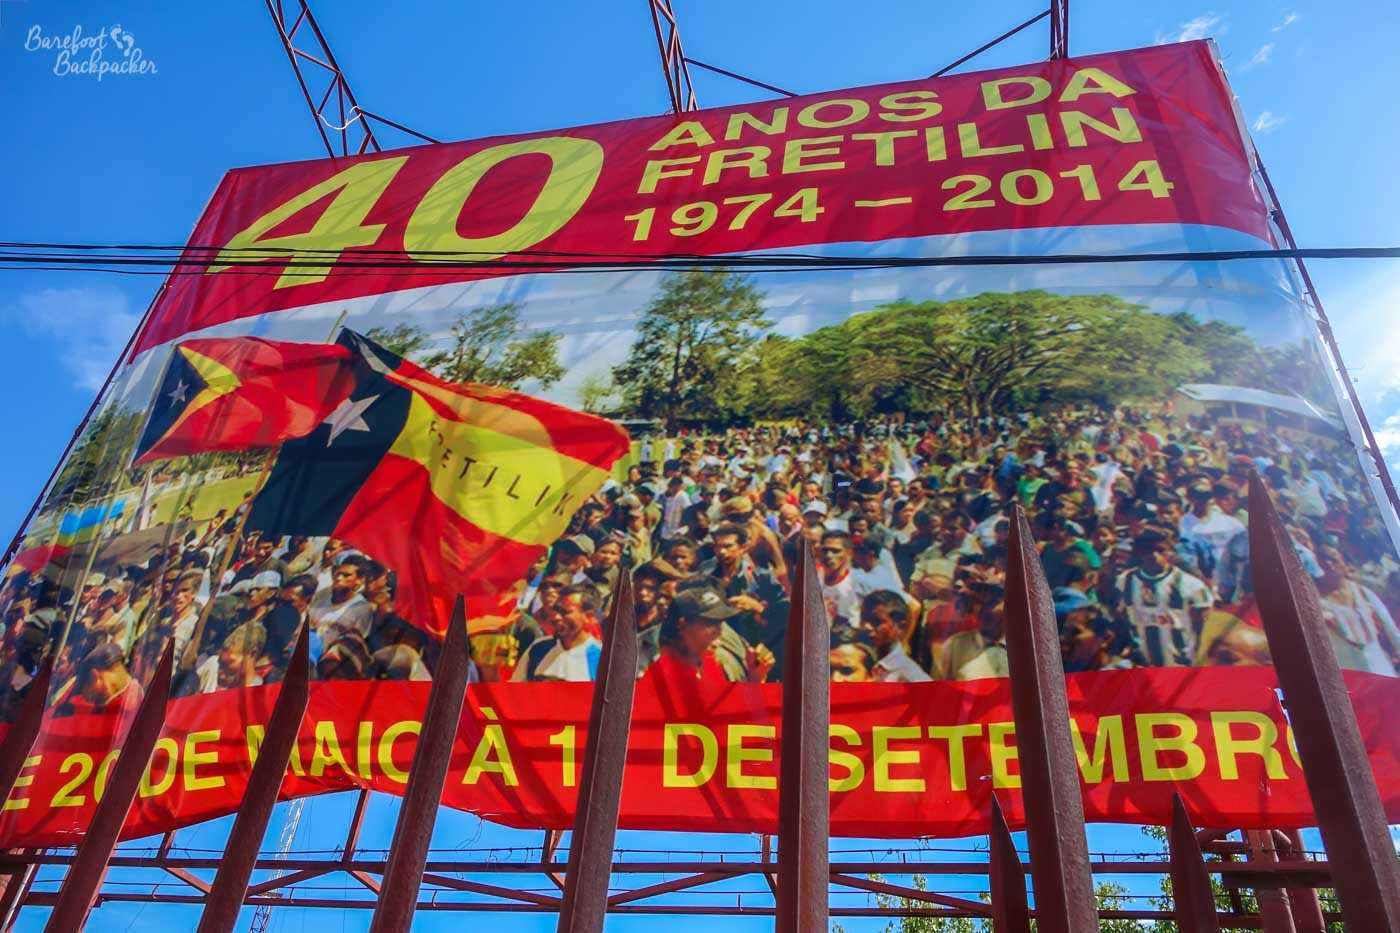 A large poster behind an iron fence, quite high above the ground. It says '40 anos da Fretilin 1974-2014', and shows a large crowd of people with a couple of Timor-Leste flags.